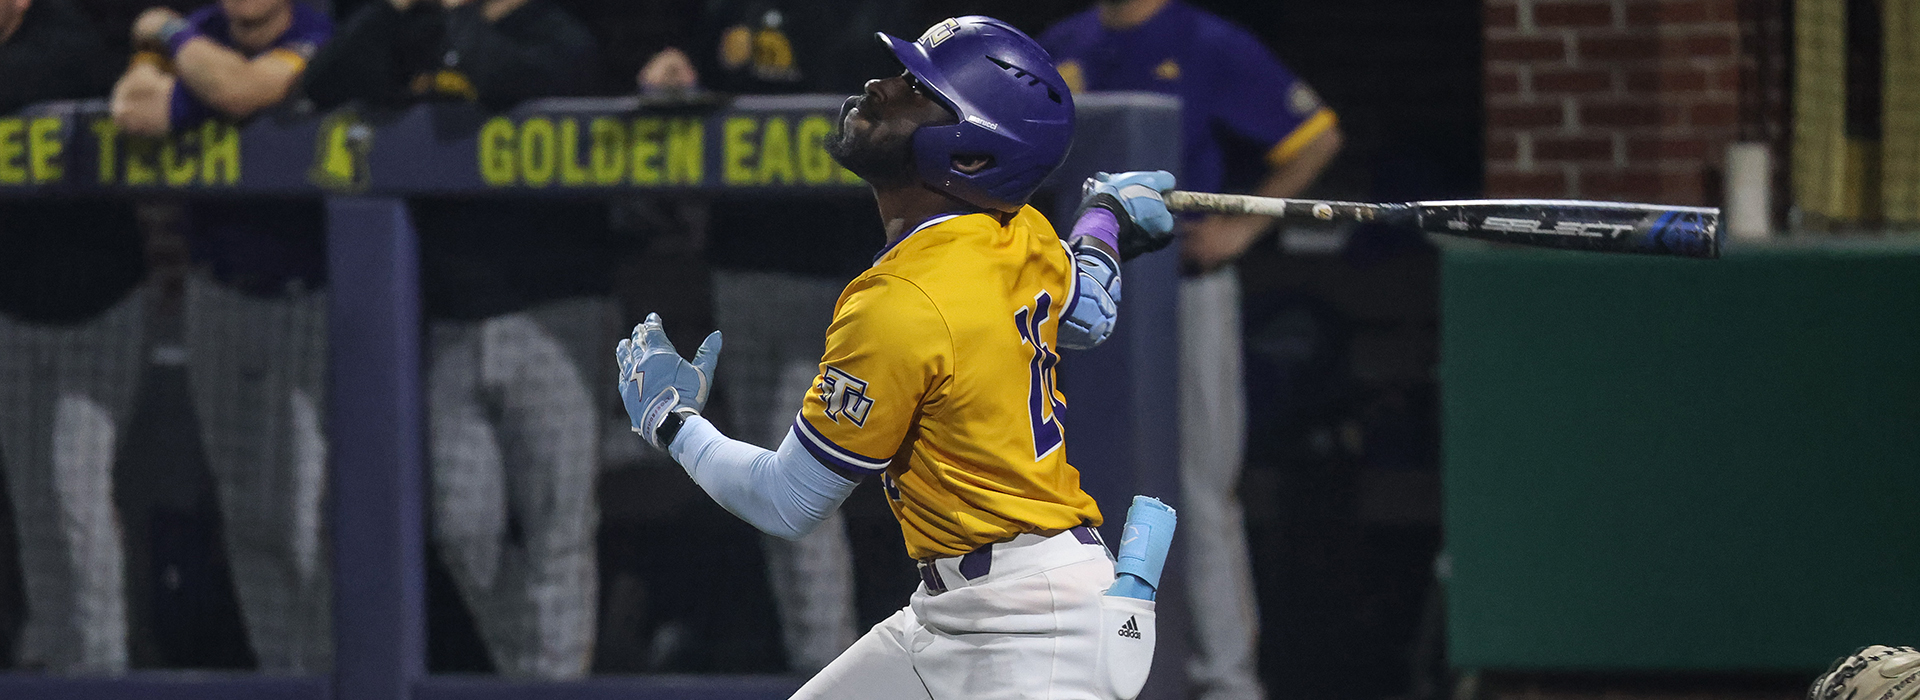 Offense explodes in Tech's 12-2 win over Western Illinois